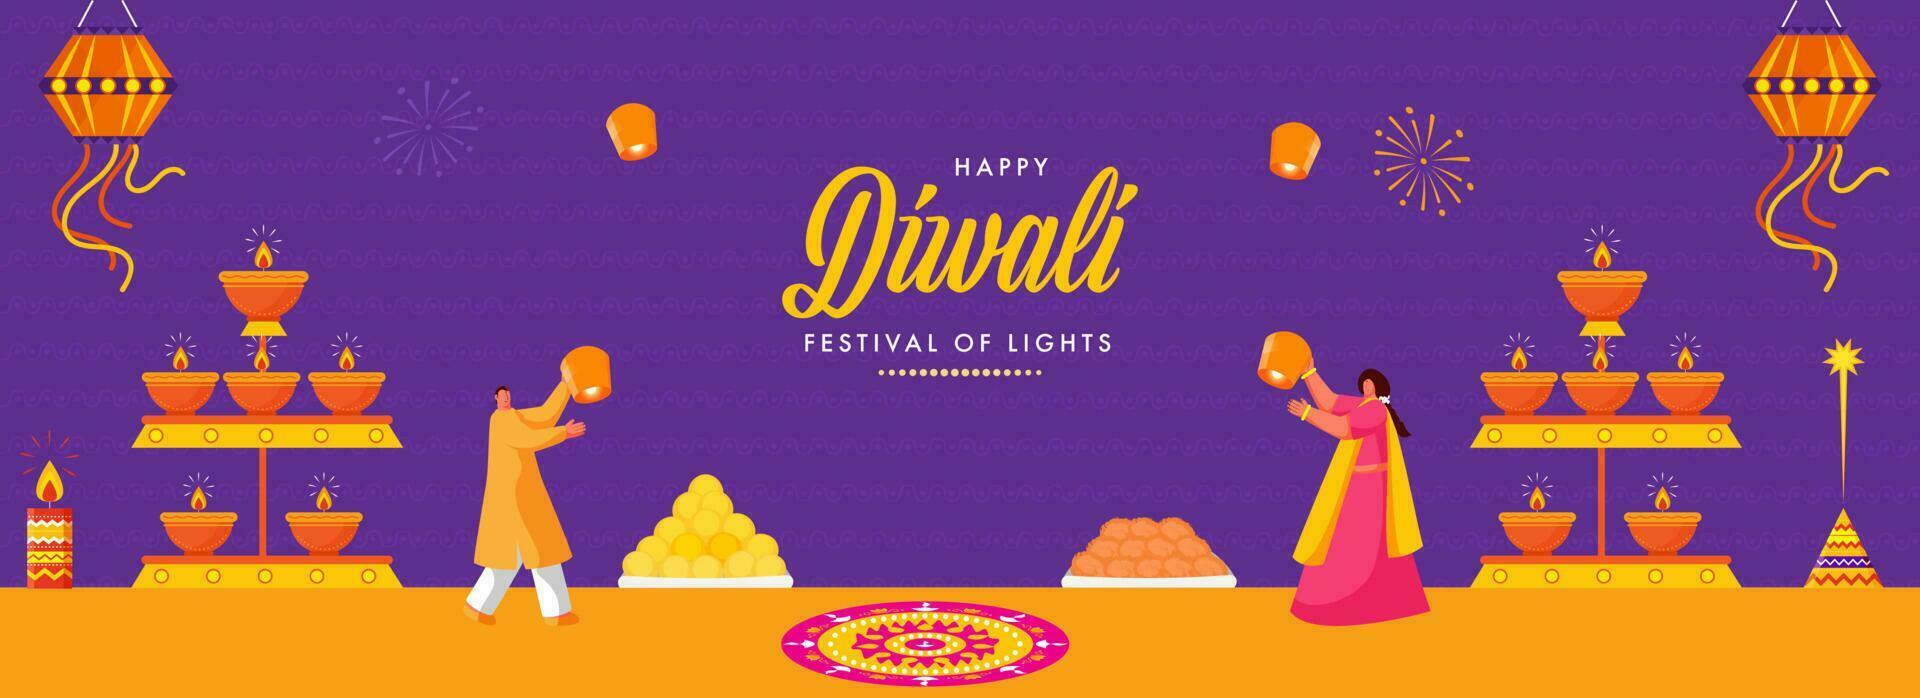 Happy Diwali Celebration Background With Lit Oil Lamps Stand, Indian Sweet And People Holding Sky Lanterns. vector